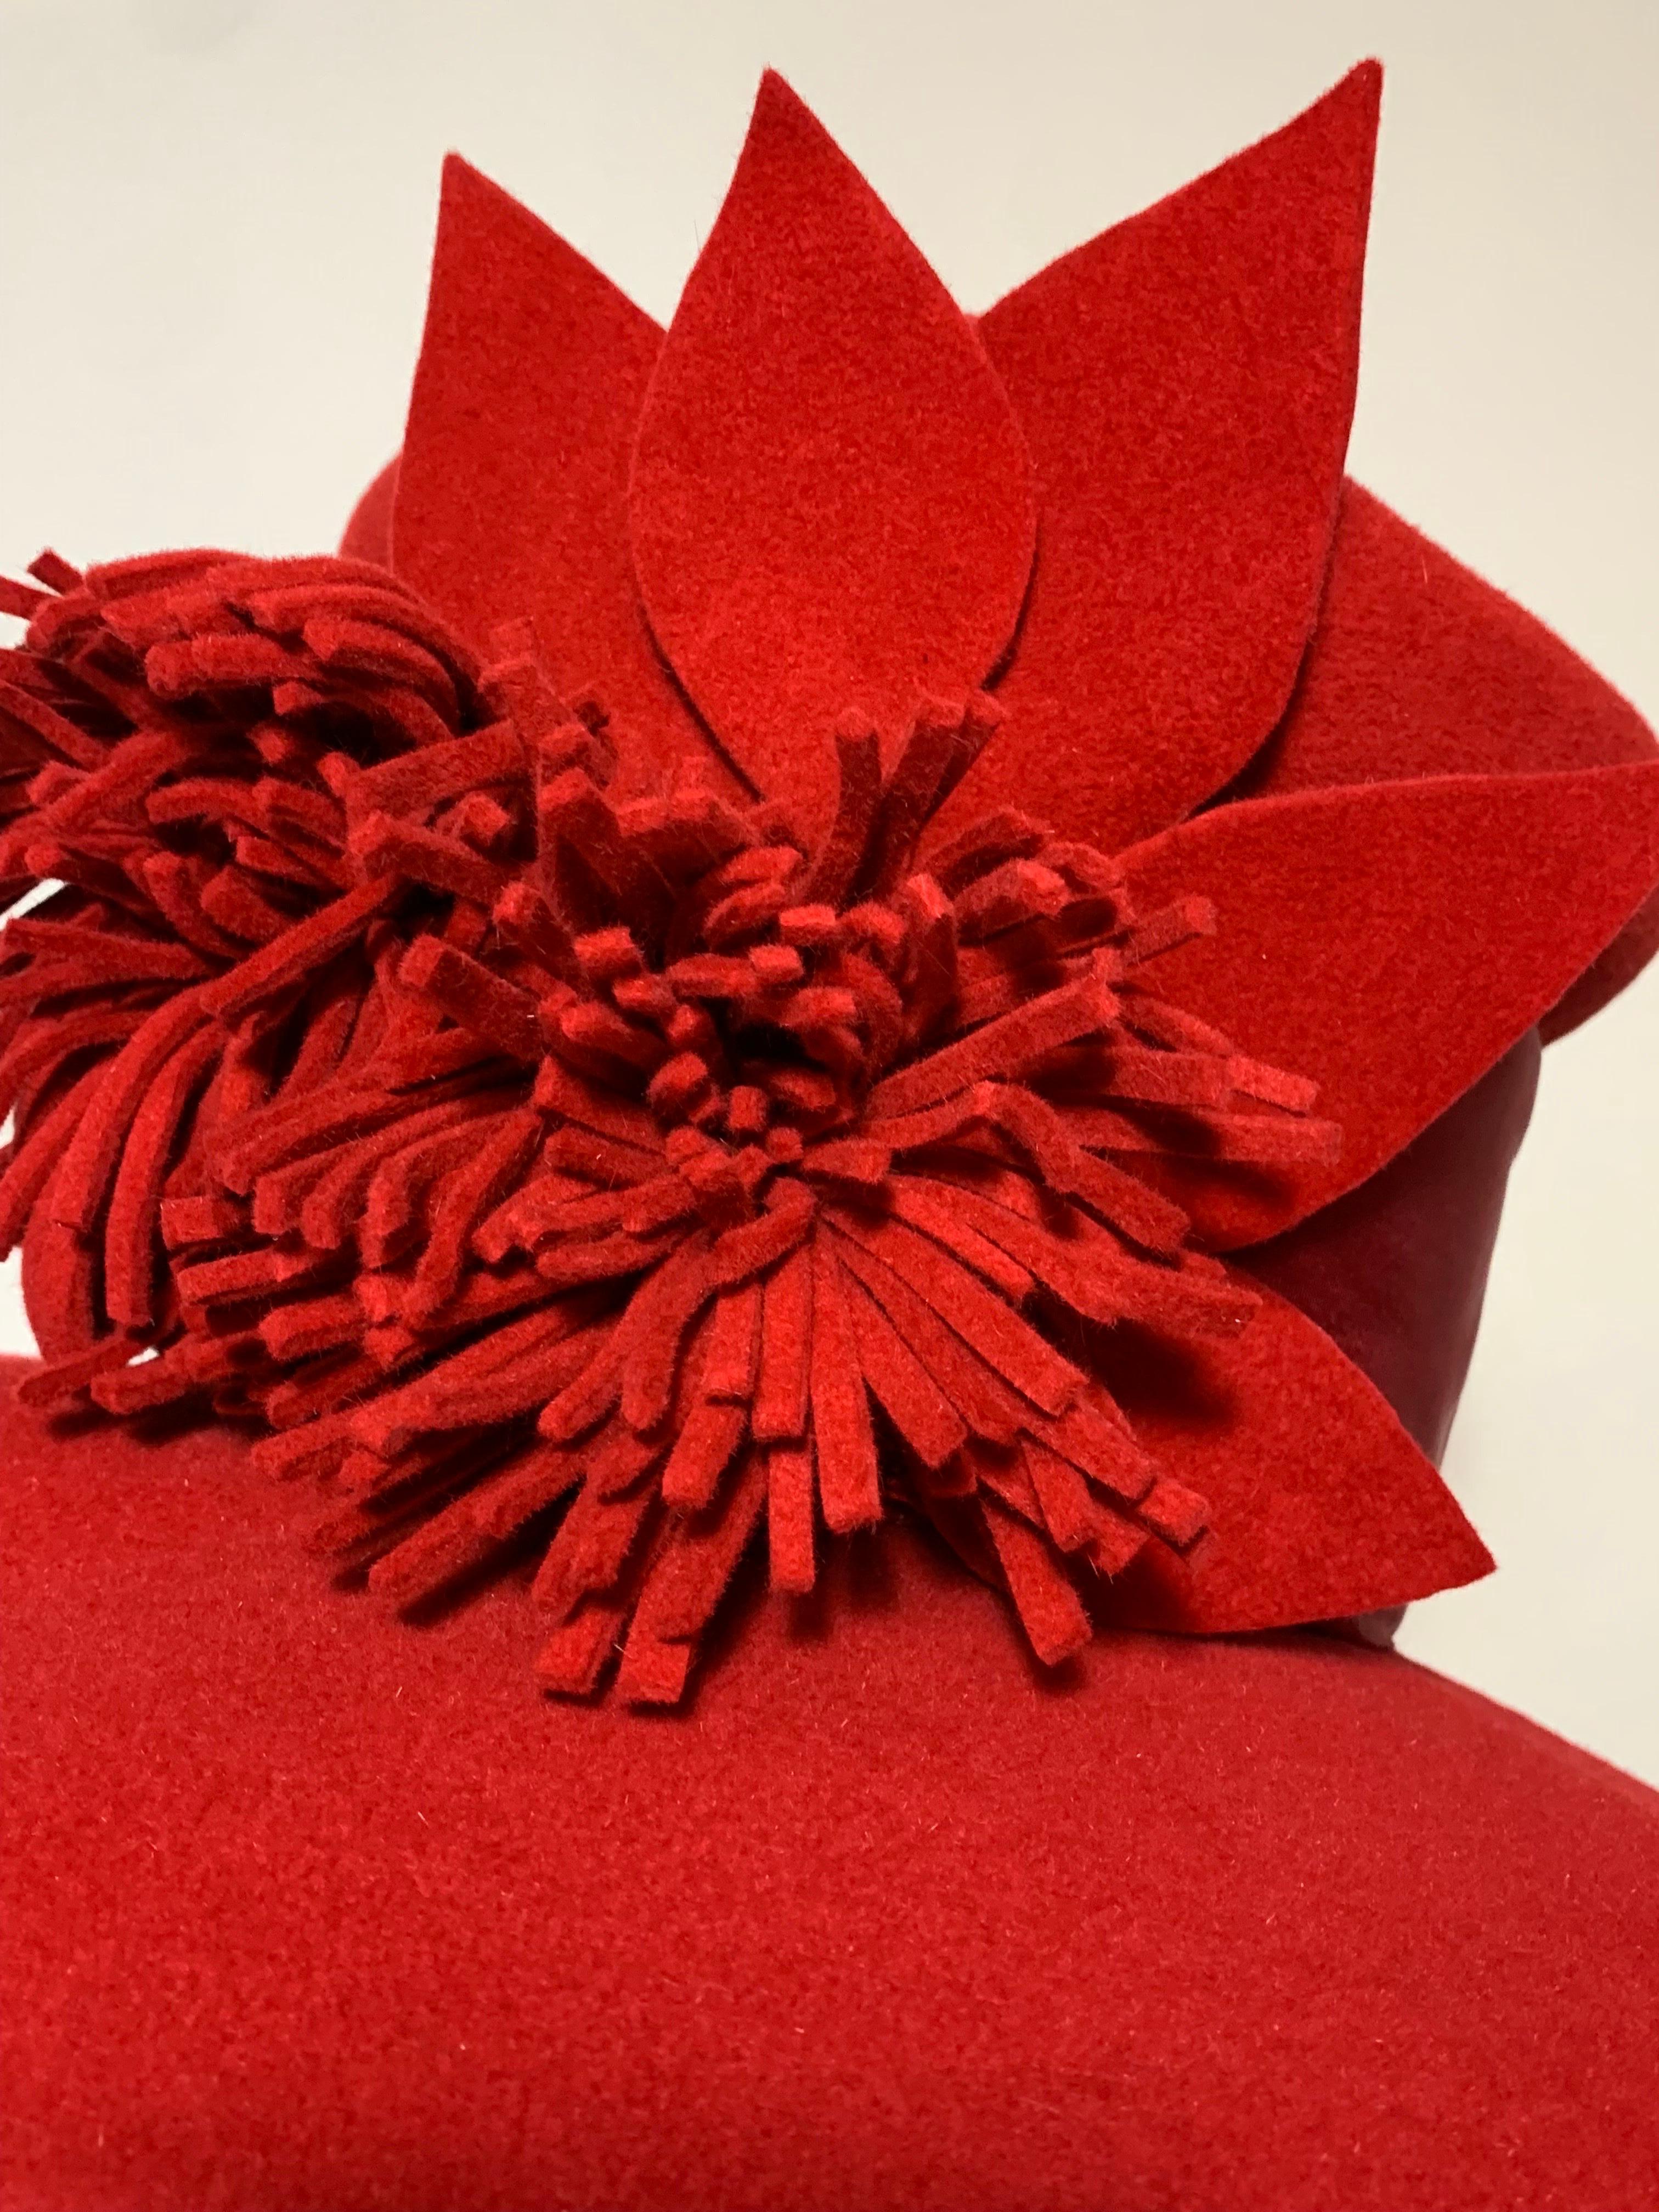 Maison Michel Scarlet Red Wool Felt Wide Brim Hat w Fringe Flower & Leaves : Tall body, rounded crown hat with wired 17 1/2